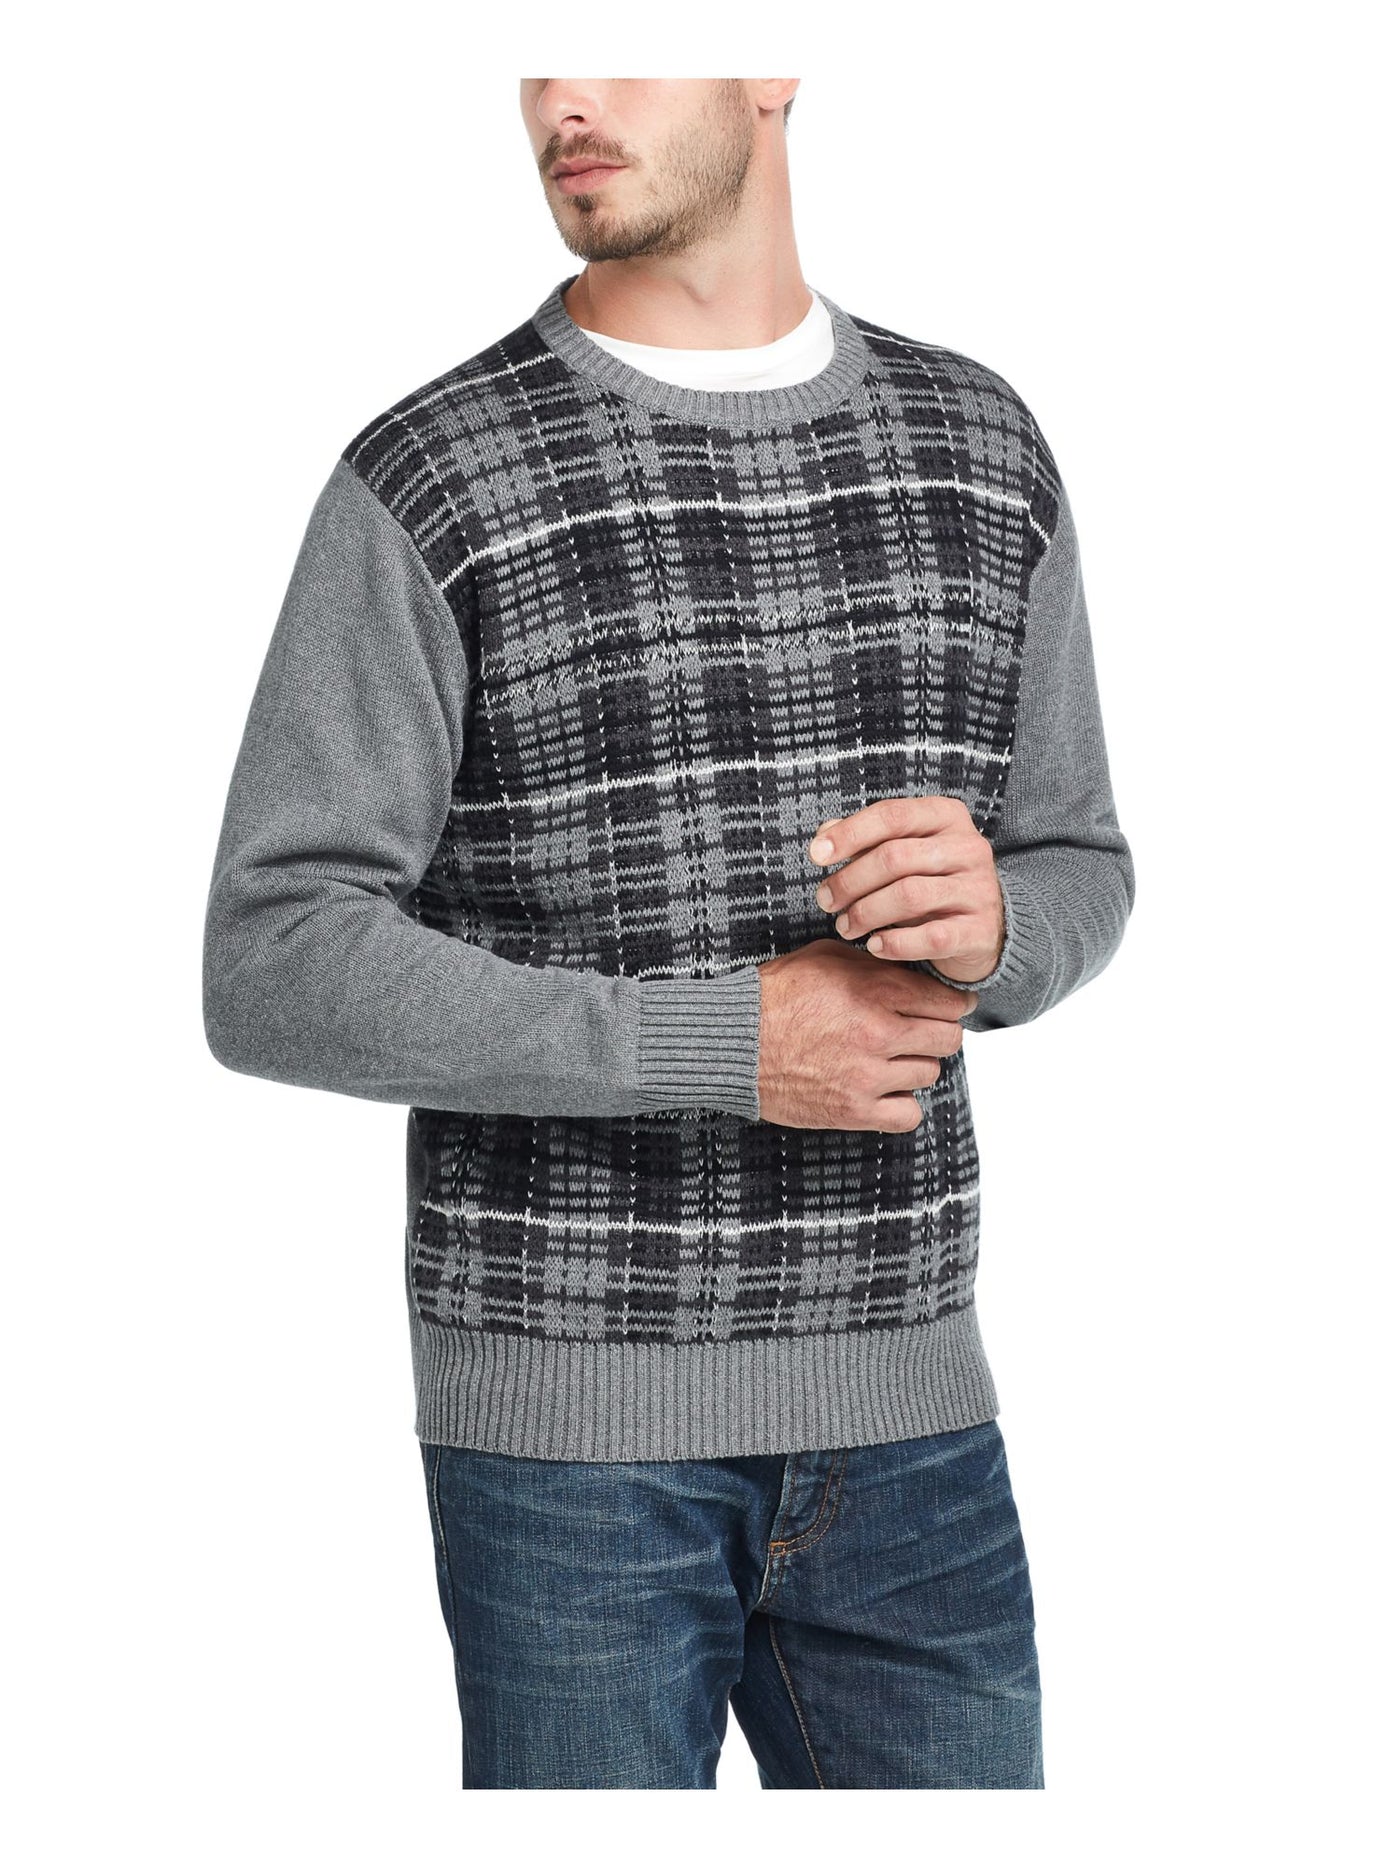 WEATHERPROOF VINTAGE Mens Gray Patterned Long Sleeve Crew Neck Classic Fit Vintage Look Pullover Sweater S